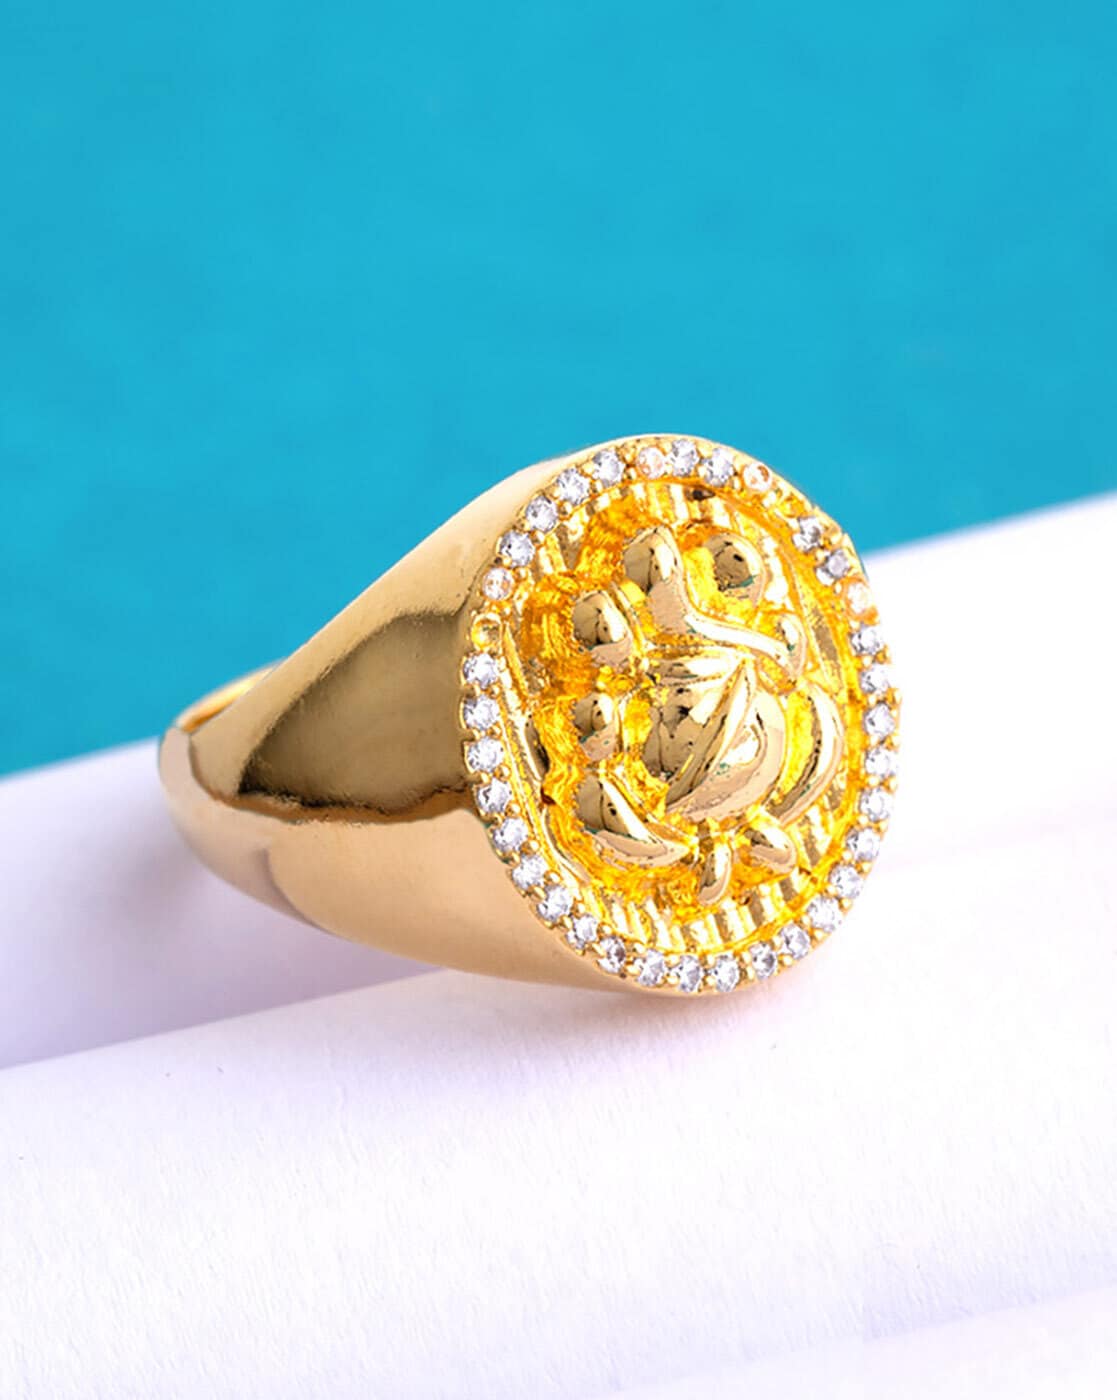 22K Gold Ganesha Ring - RiMs16703 - 22K Gold Ring with Lord Ganesh in oval  frost finish with machine cuts on sides.